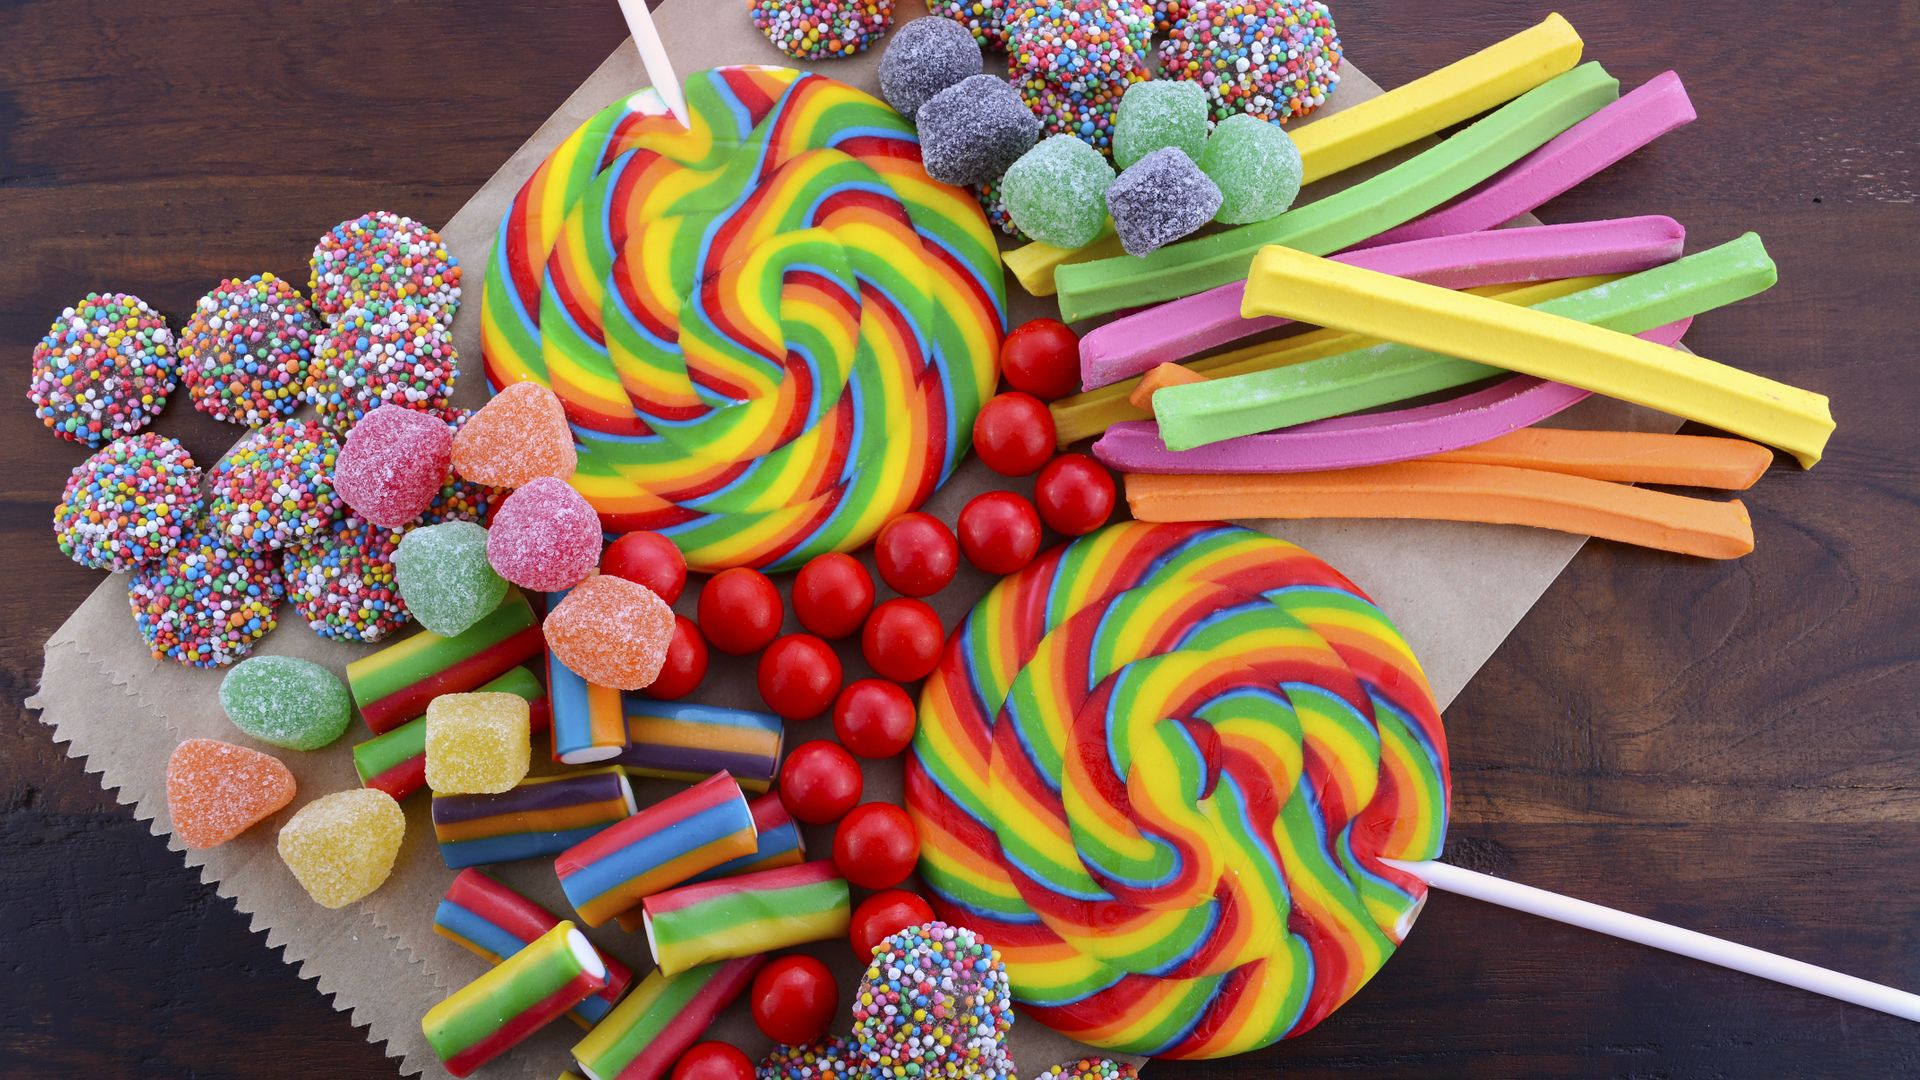 Sweets Candies Hd Wallpaper - Colorful Candy Wallpaper Hd - HD Wallpaper 